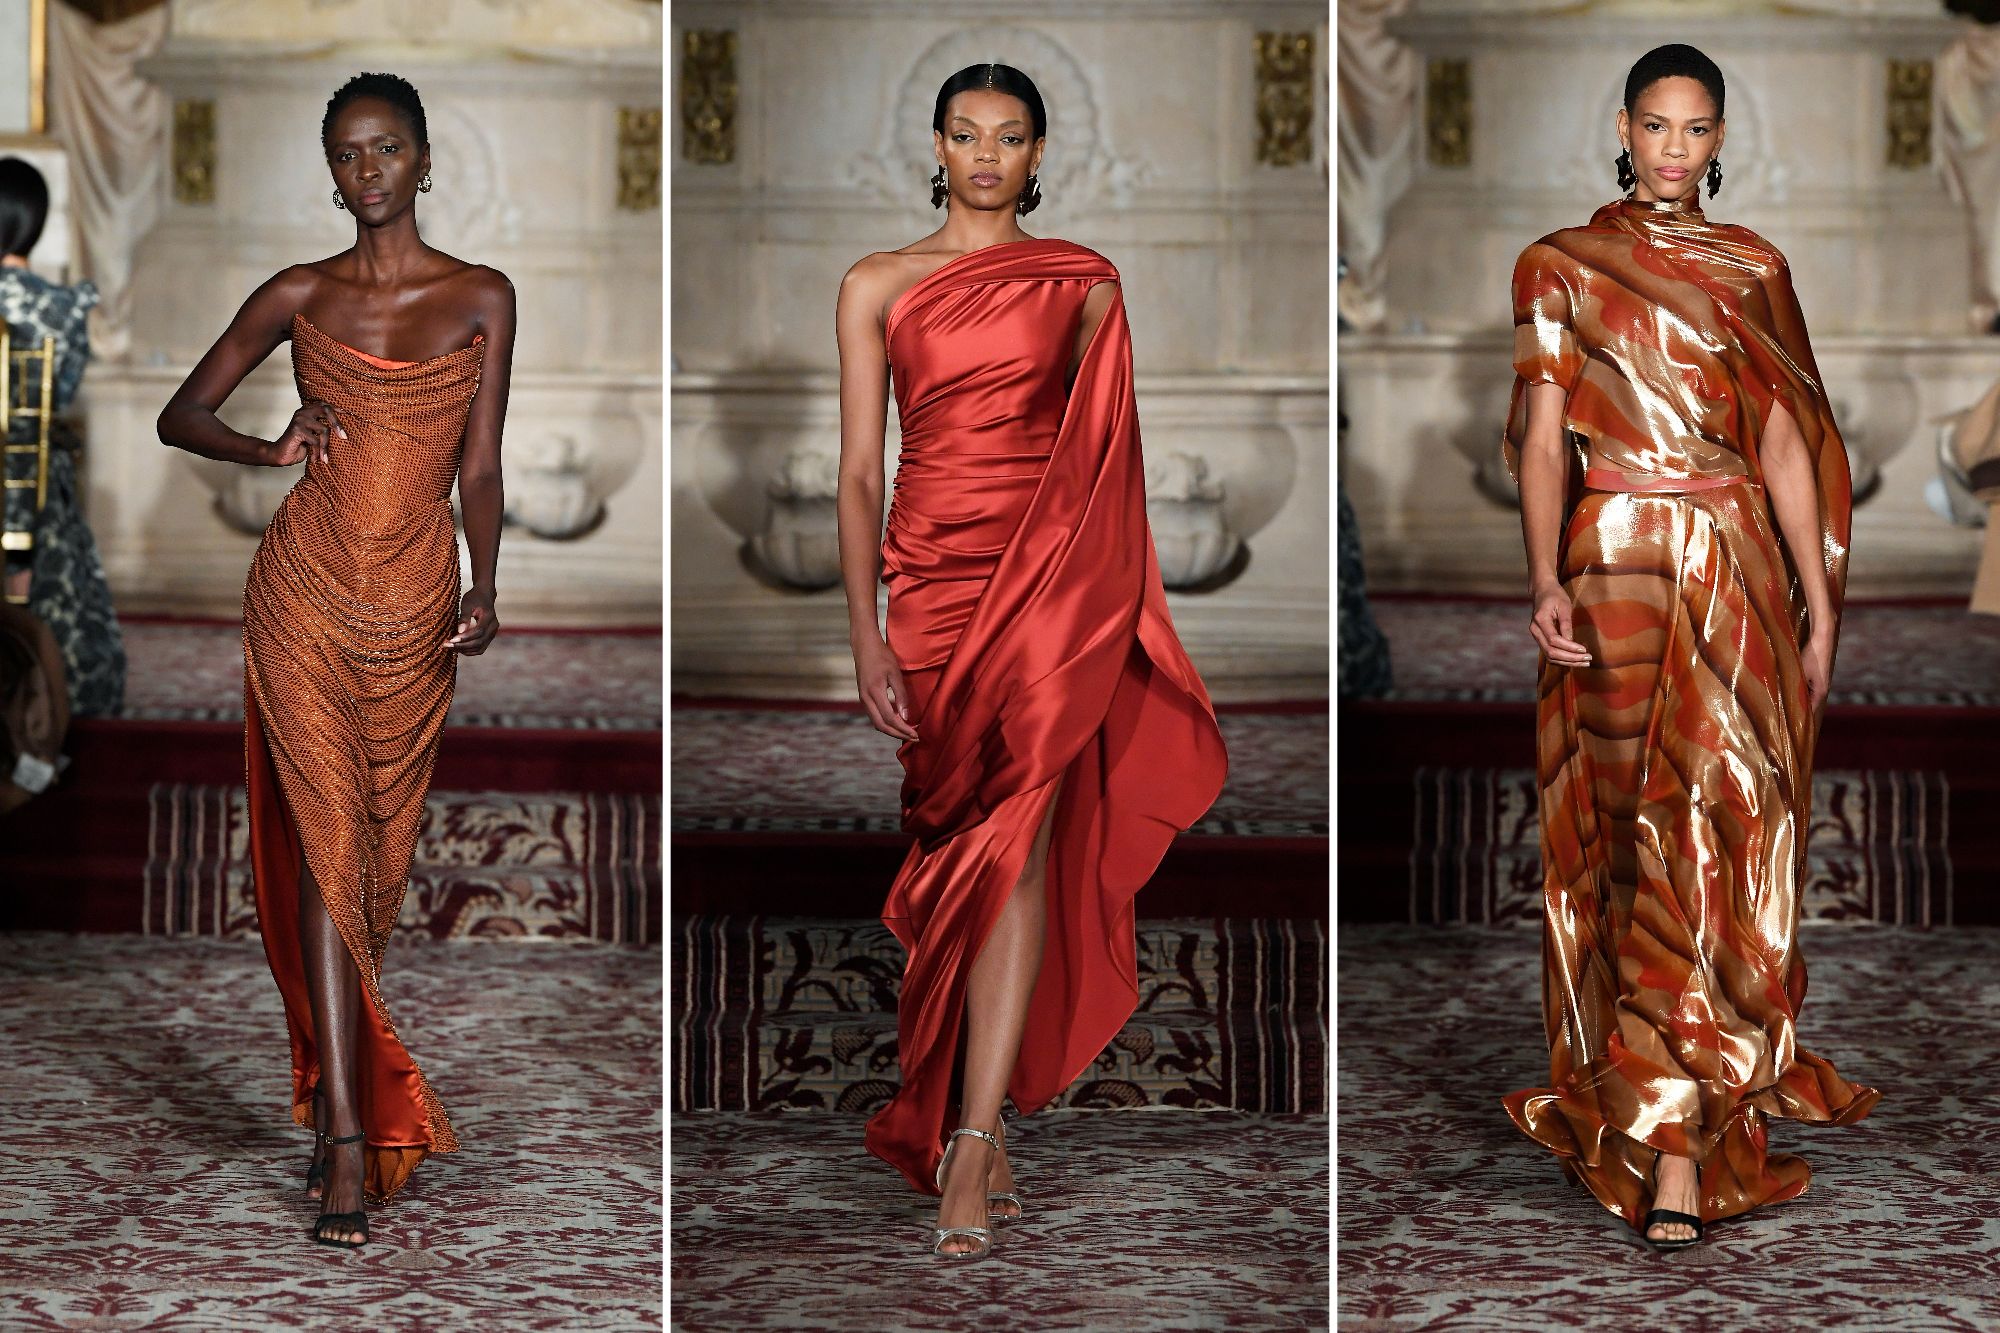 Three looks from Siriano's collection. On the far left, an orange corset draped gown; in the center, a red, one-shoulder draped dress; and on the right, an orange patterned dress.